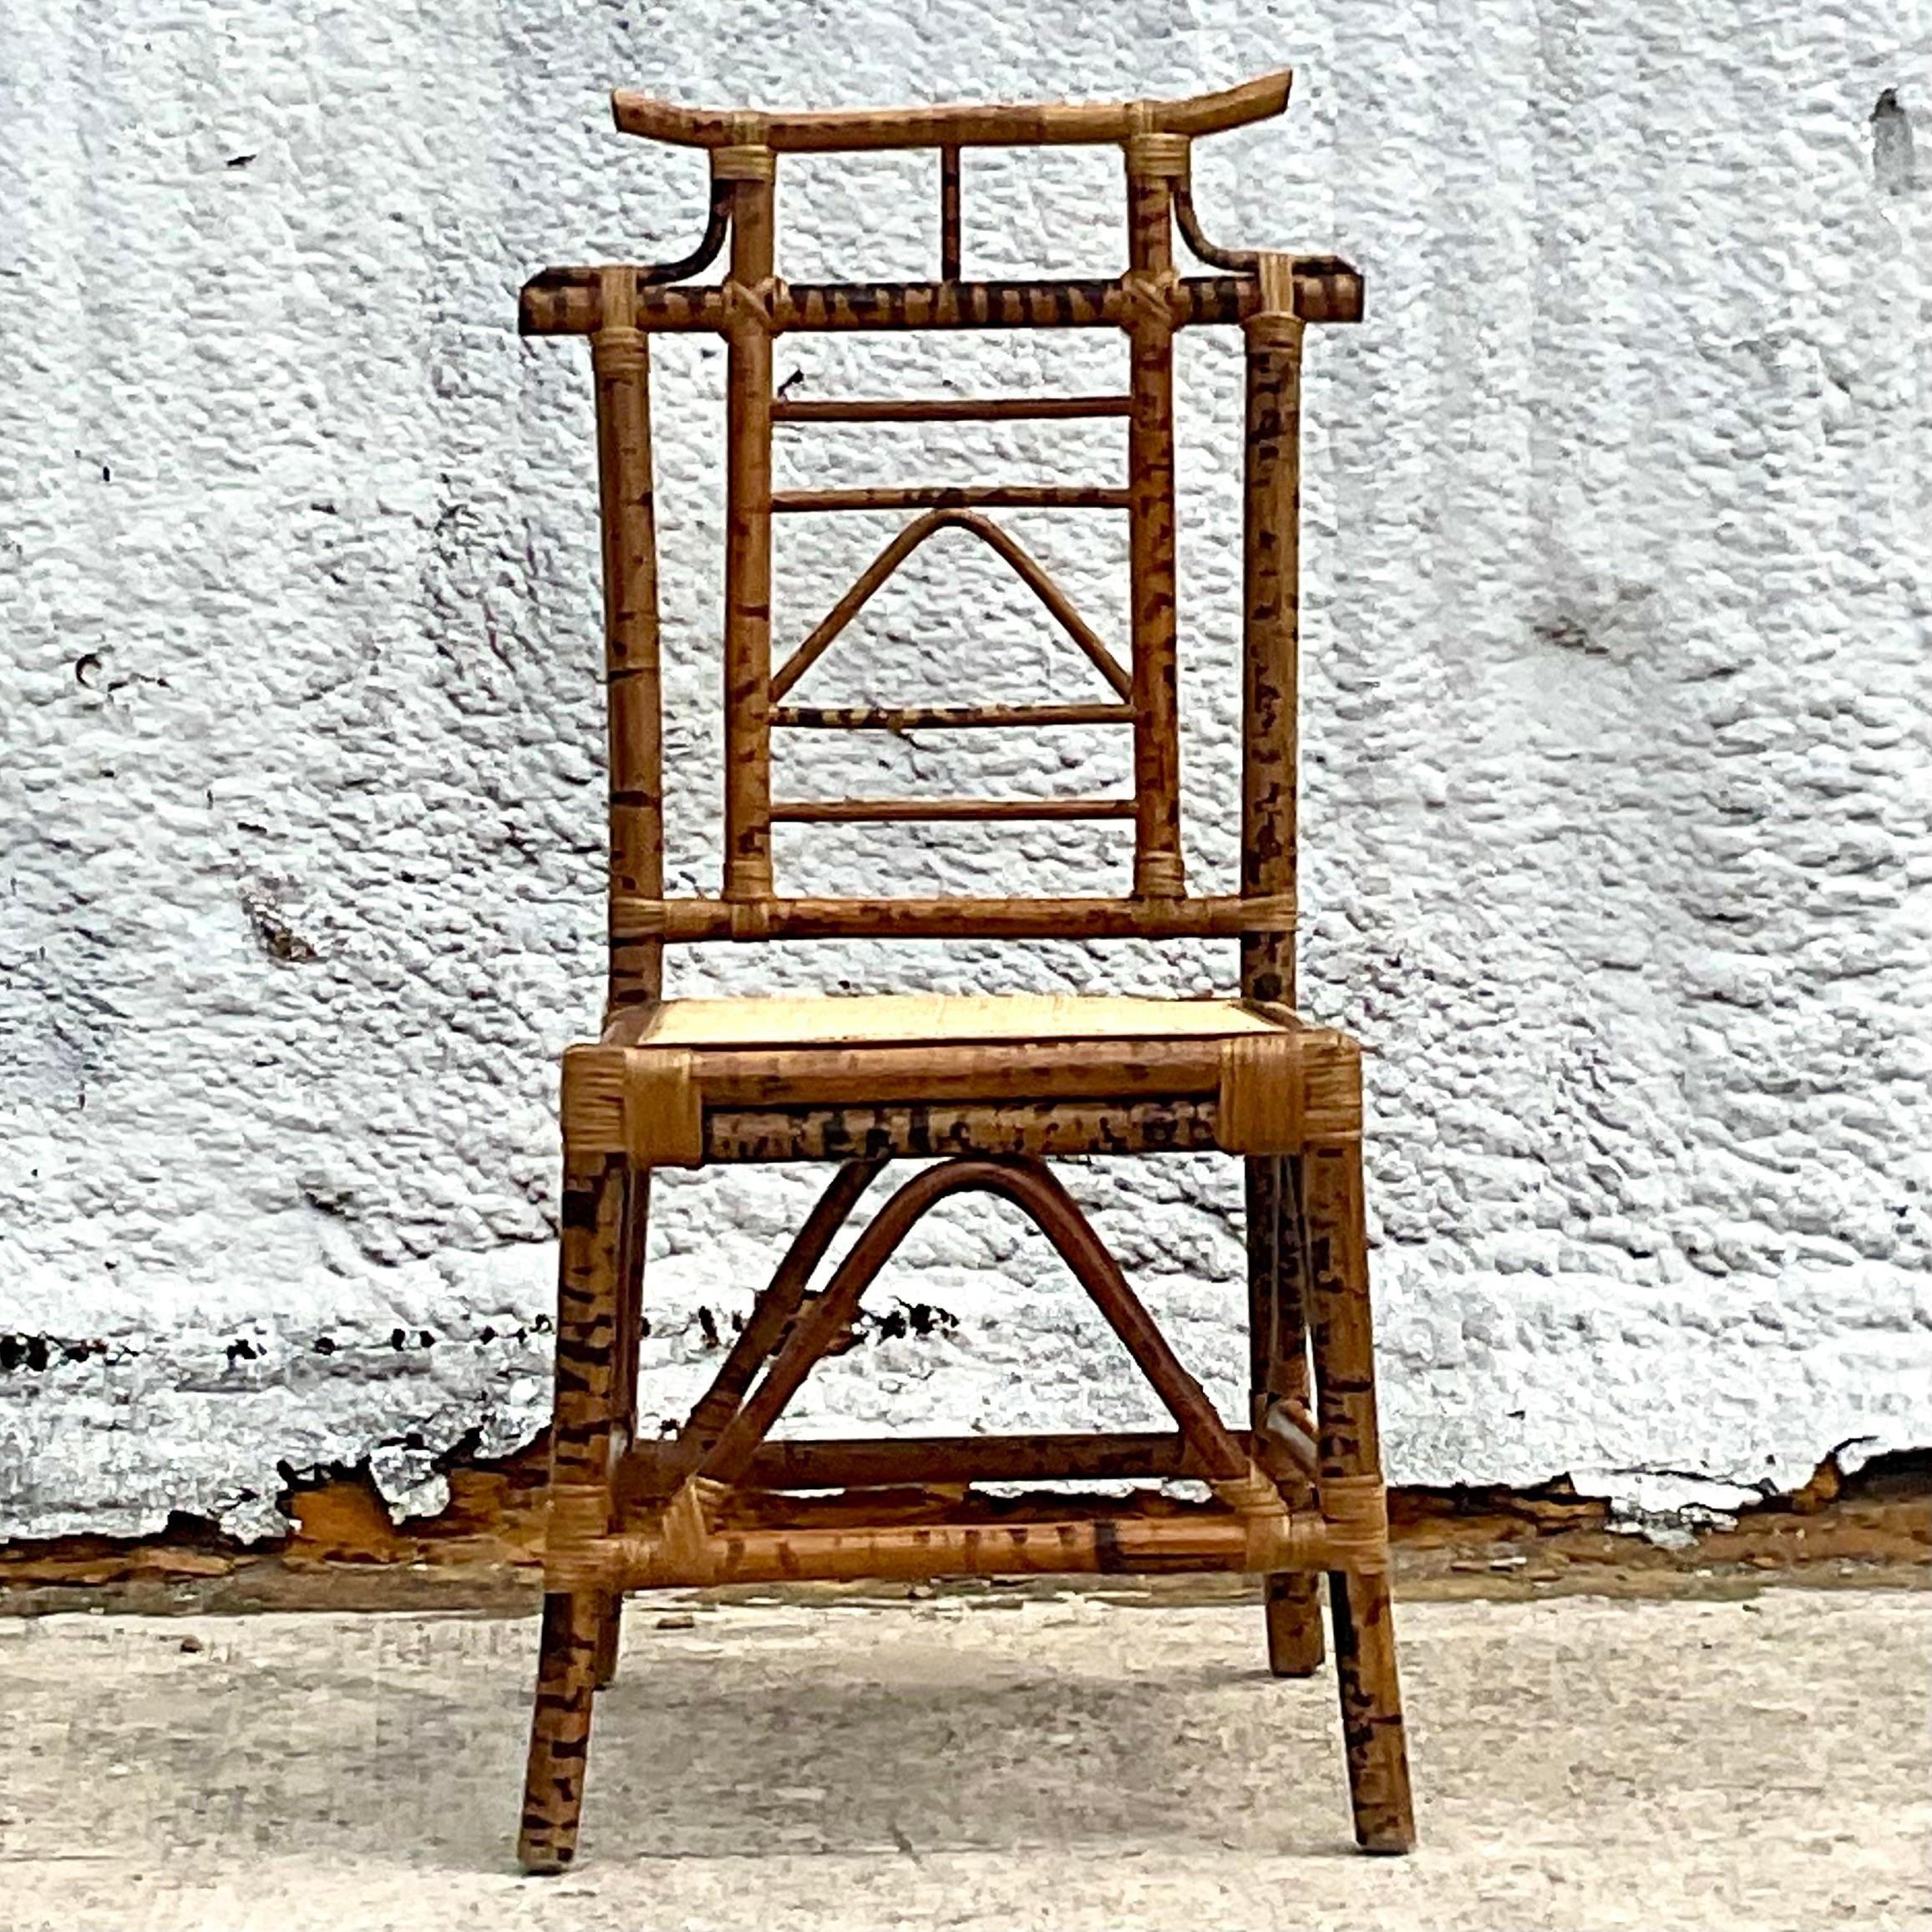 A fantastic vintage coastal chair. A chic Pagoda design in a burnt bamboo frame. Inset cane seat. handmade construction that makes it a little asymmetrical. Original to the design. Acquired from a Palm Beach estate.